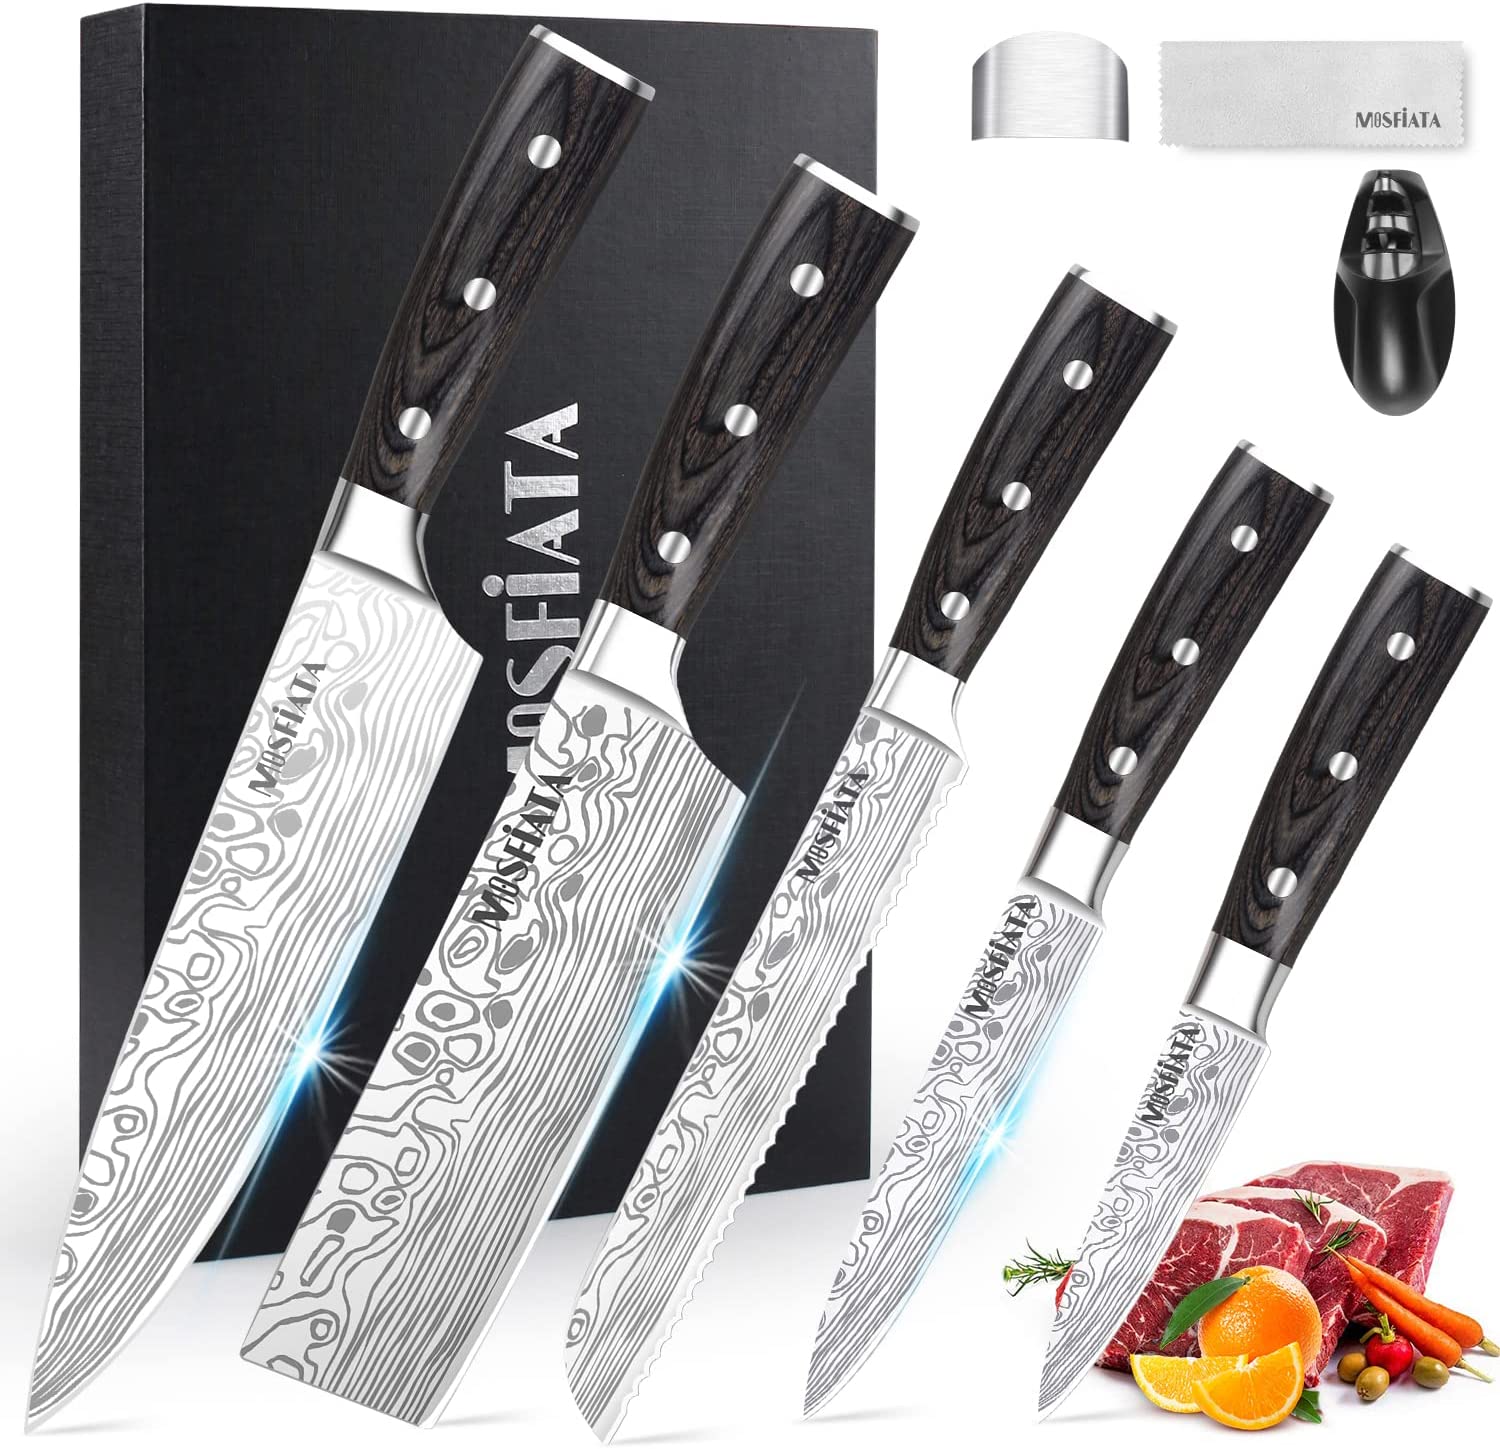 MOSFiATA Kitchen Knife Set, 17 Pcs Japanese Stainless Steel Knife Sets for  Kitchen with Block with Knife Sharpening Rod, Dishwasher Safe, Dad Birthday